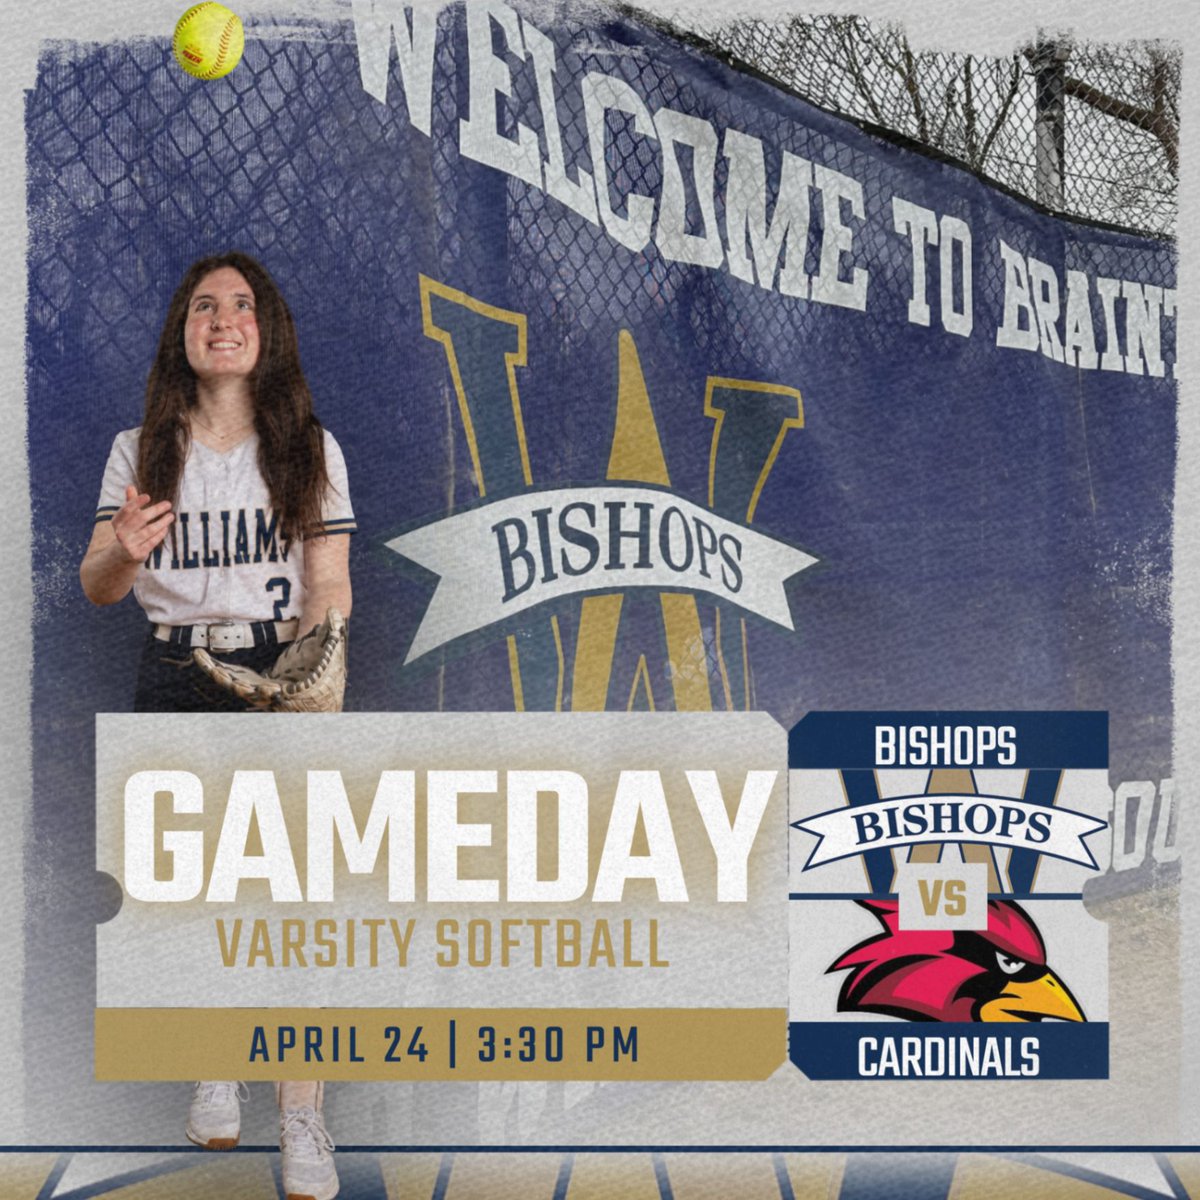 SOFTBALL: The Bishops take on the Cardinals today at Flaherty Field in a CCL showdown! First pitch is 3:30 pm! #rollbills @bishopssoftball